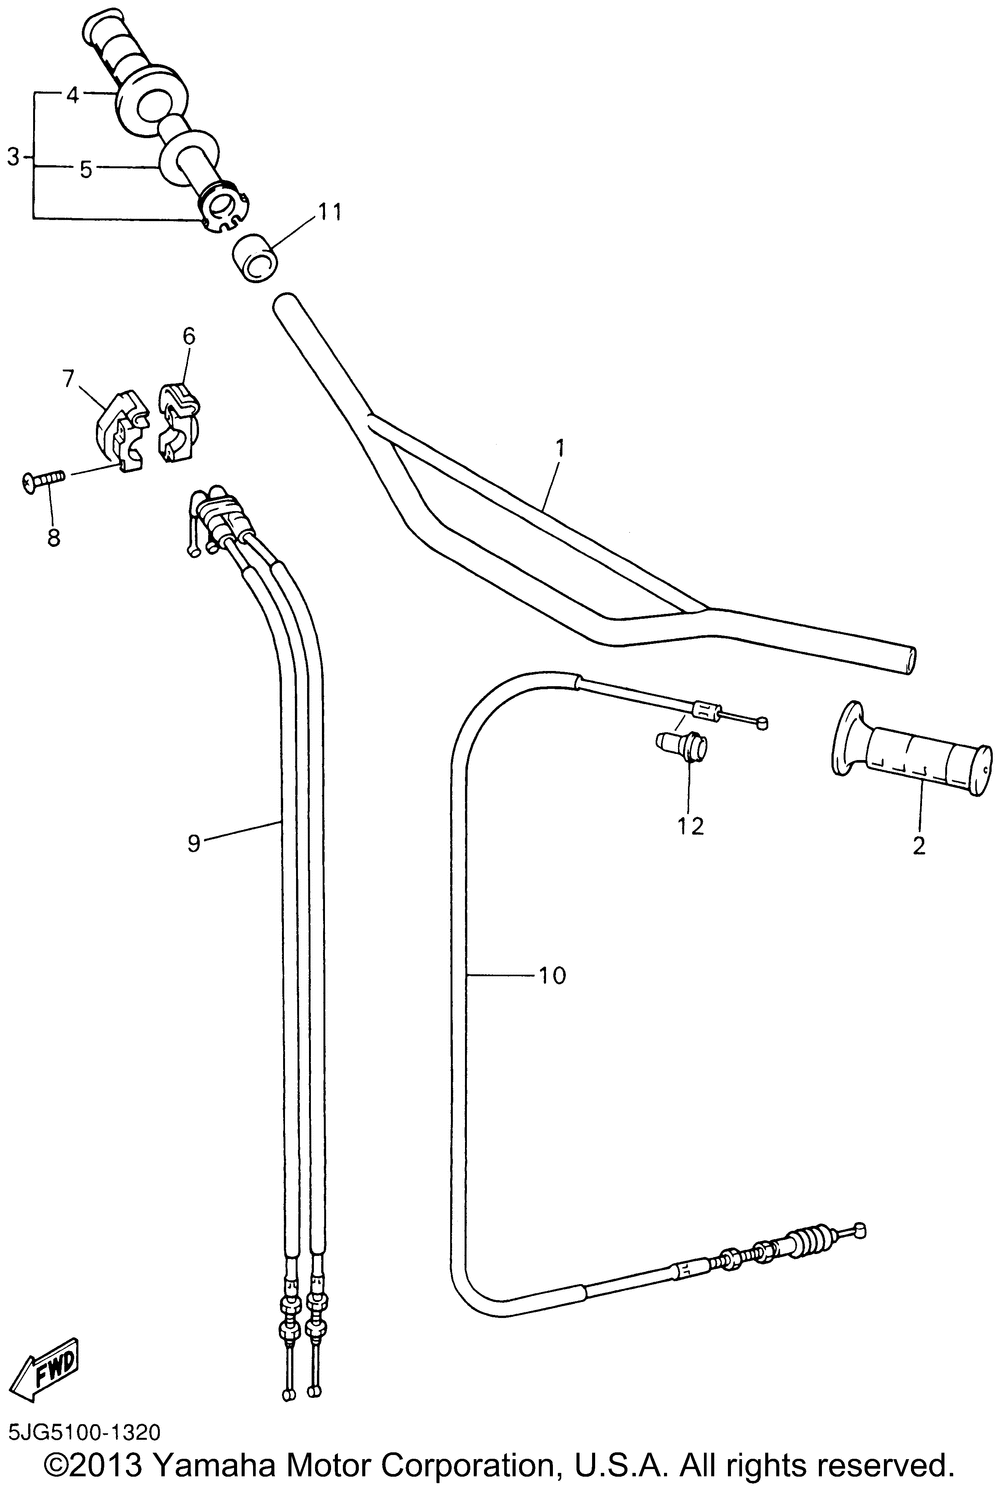 Steering handle cable